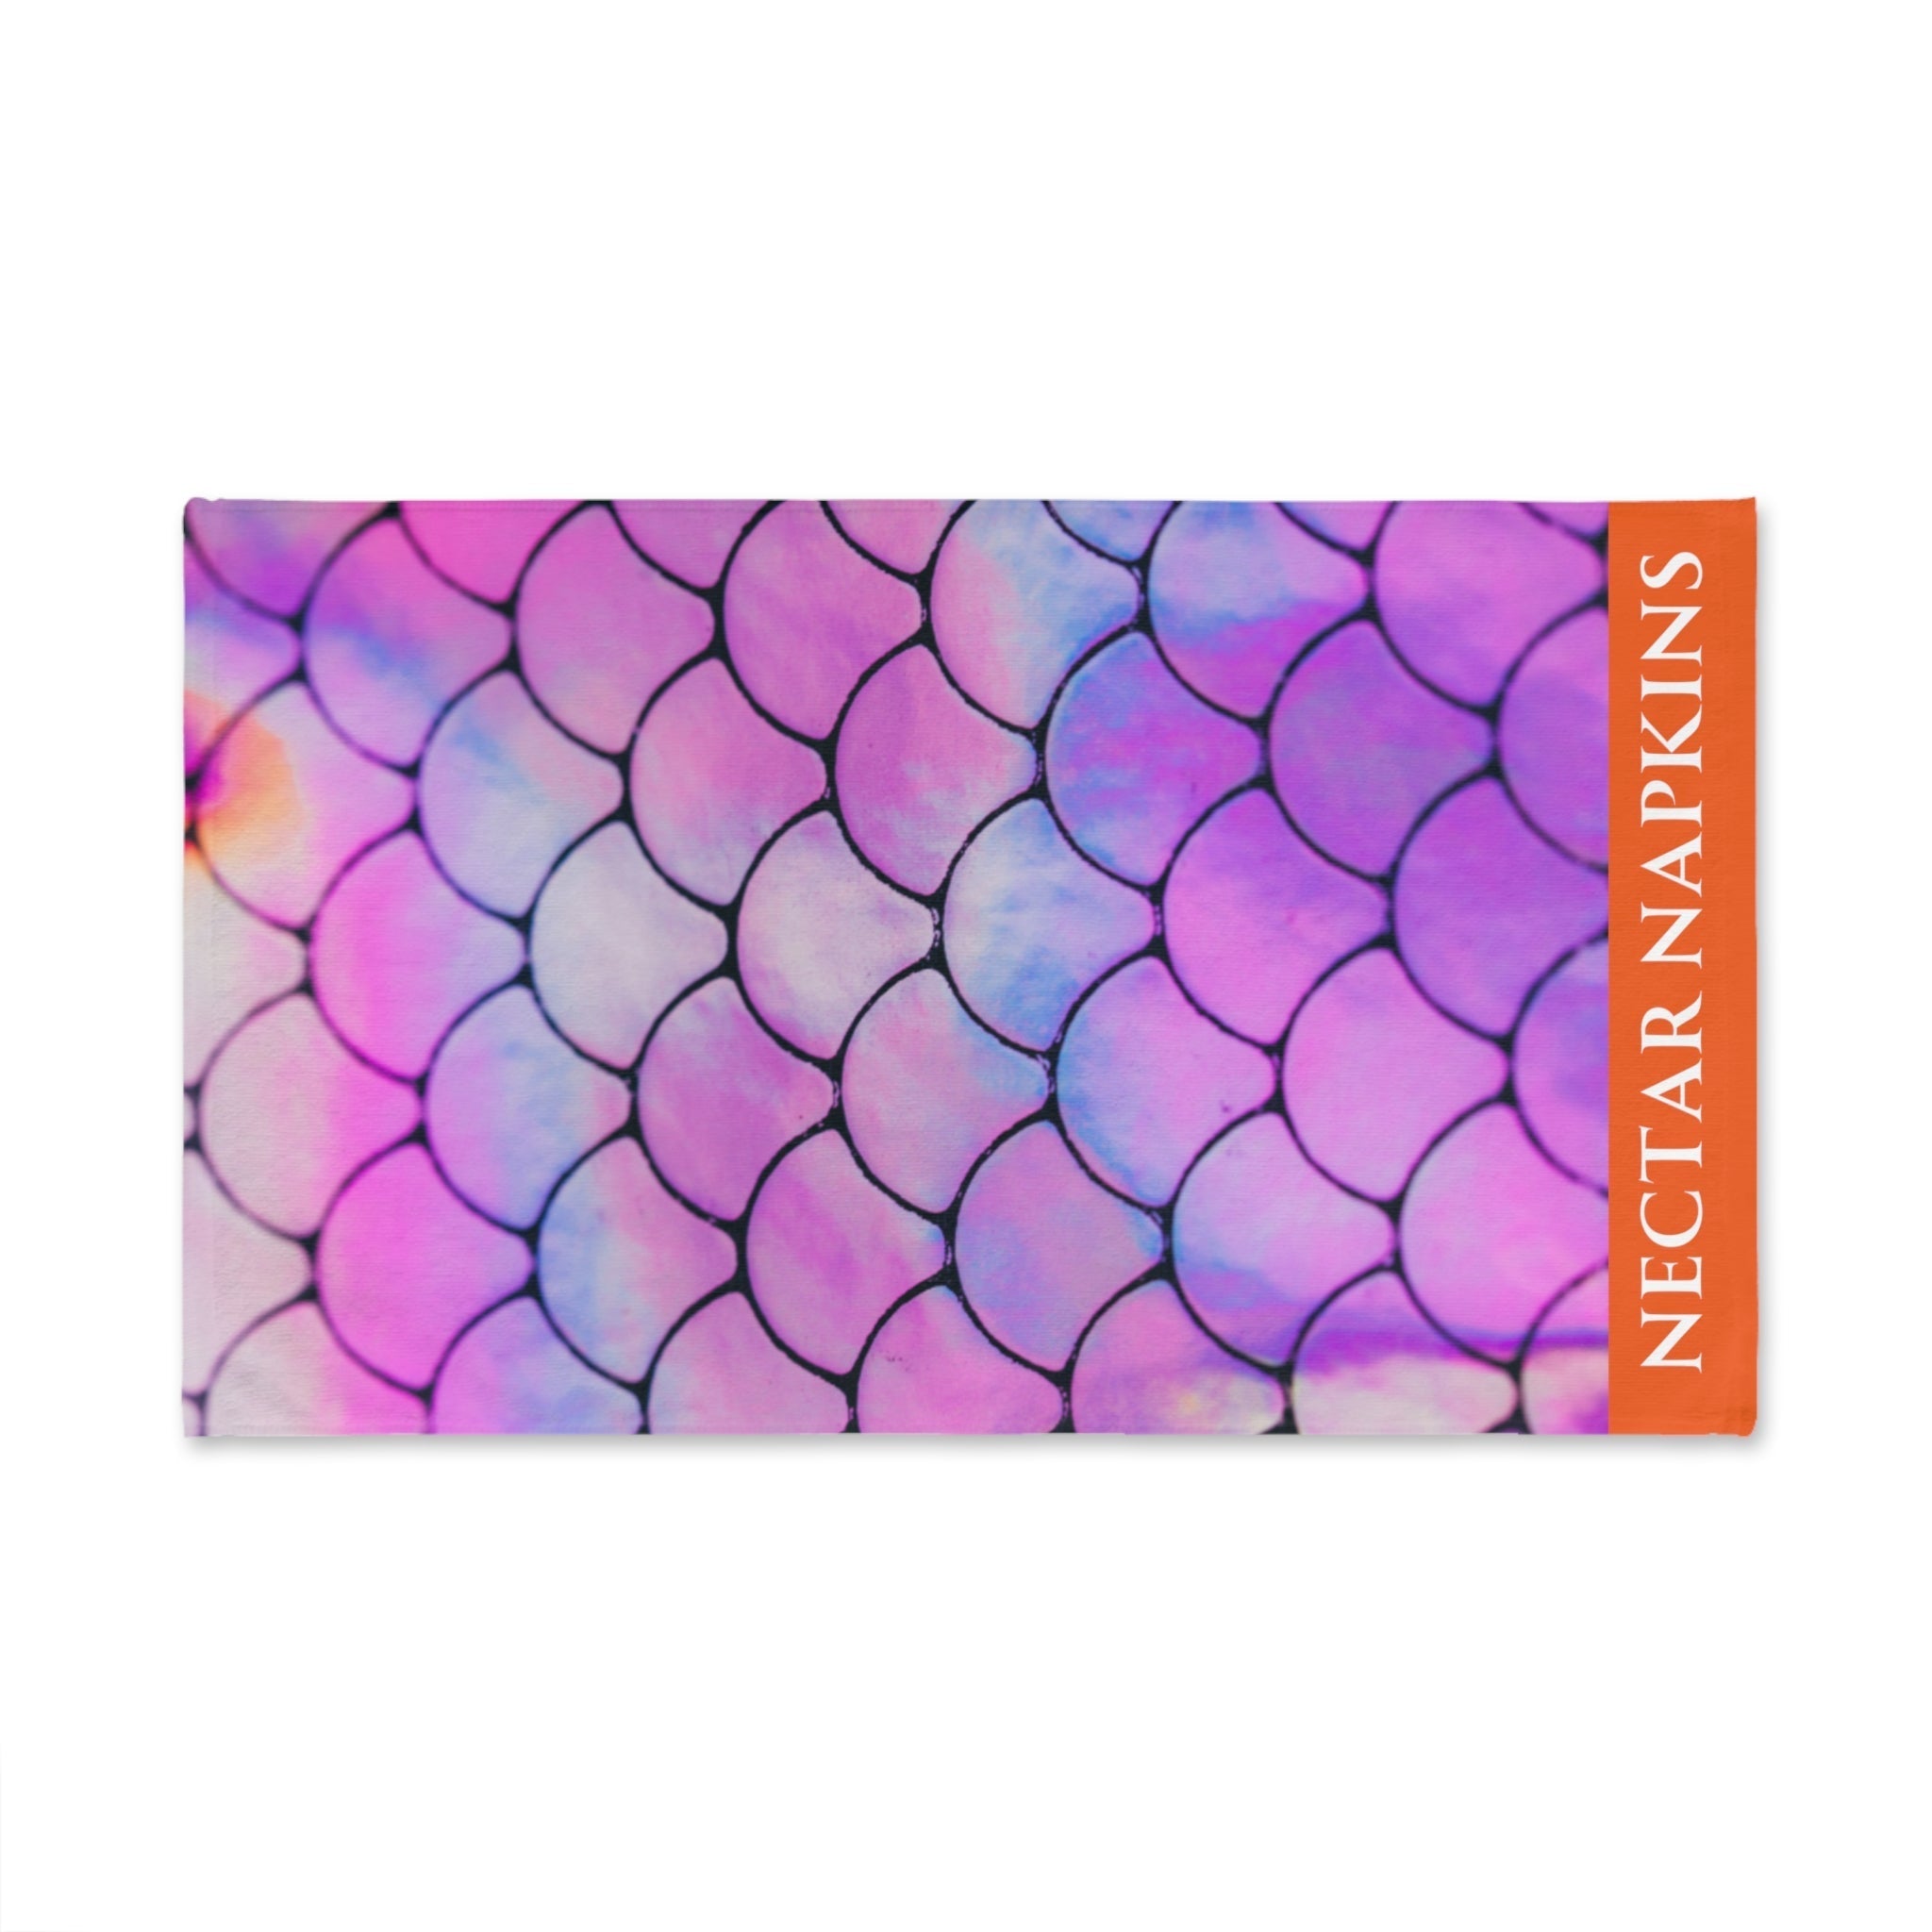 Mermaid Tail Purple Orange | Funny Gifts for Men - Gifts for Him - Birthday Gifts for Men, Him, Husband, Boyfriend, New Couple Gifts, Fathers & Valentines Day Gifts, Hand Towels NECTAR NAPKINS